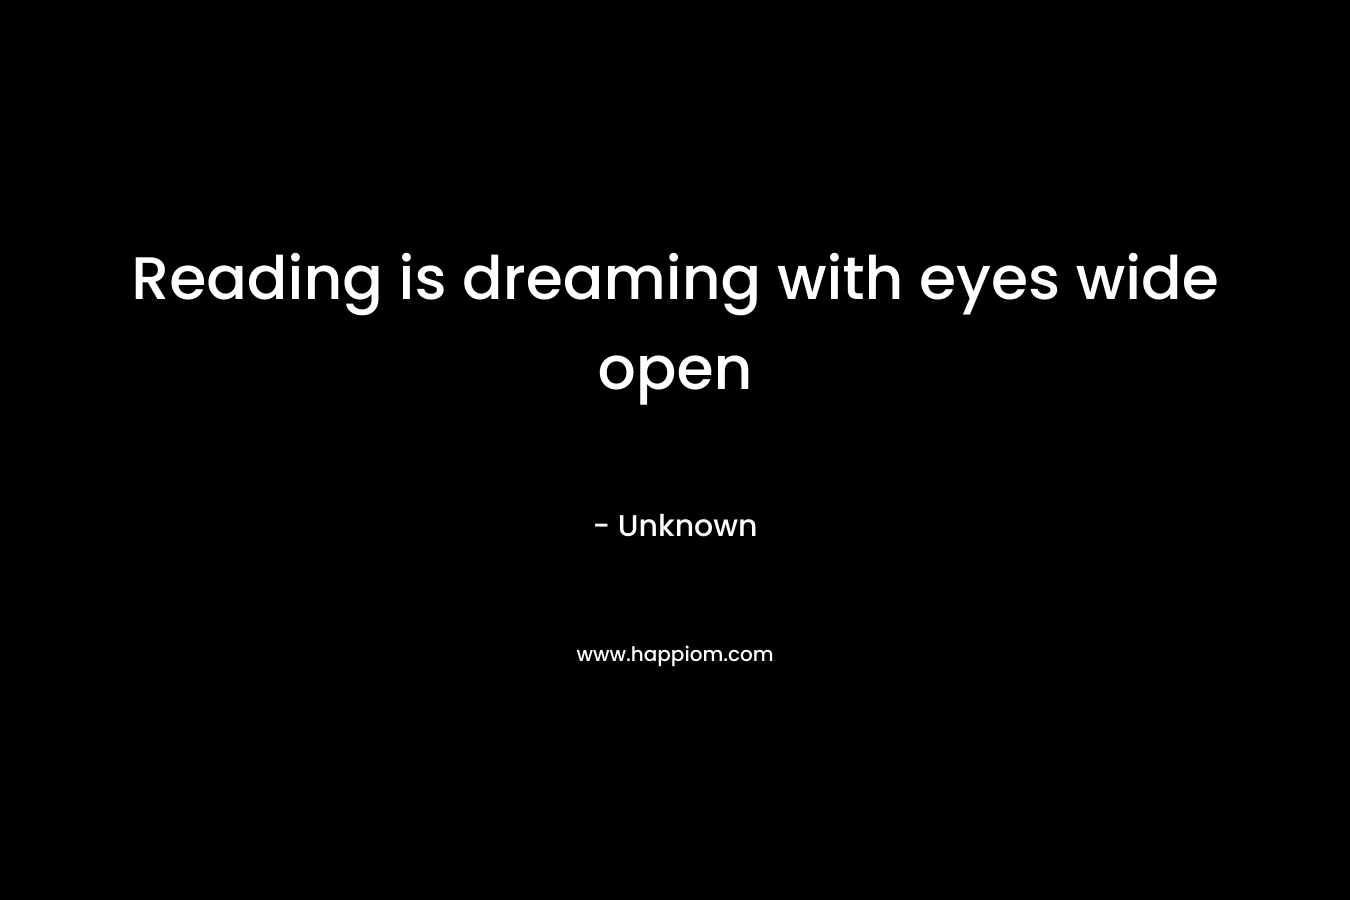 Reading is dreaming with eyes wide open